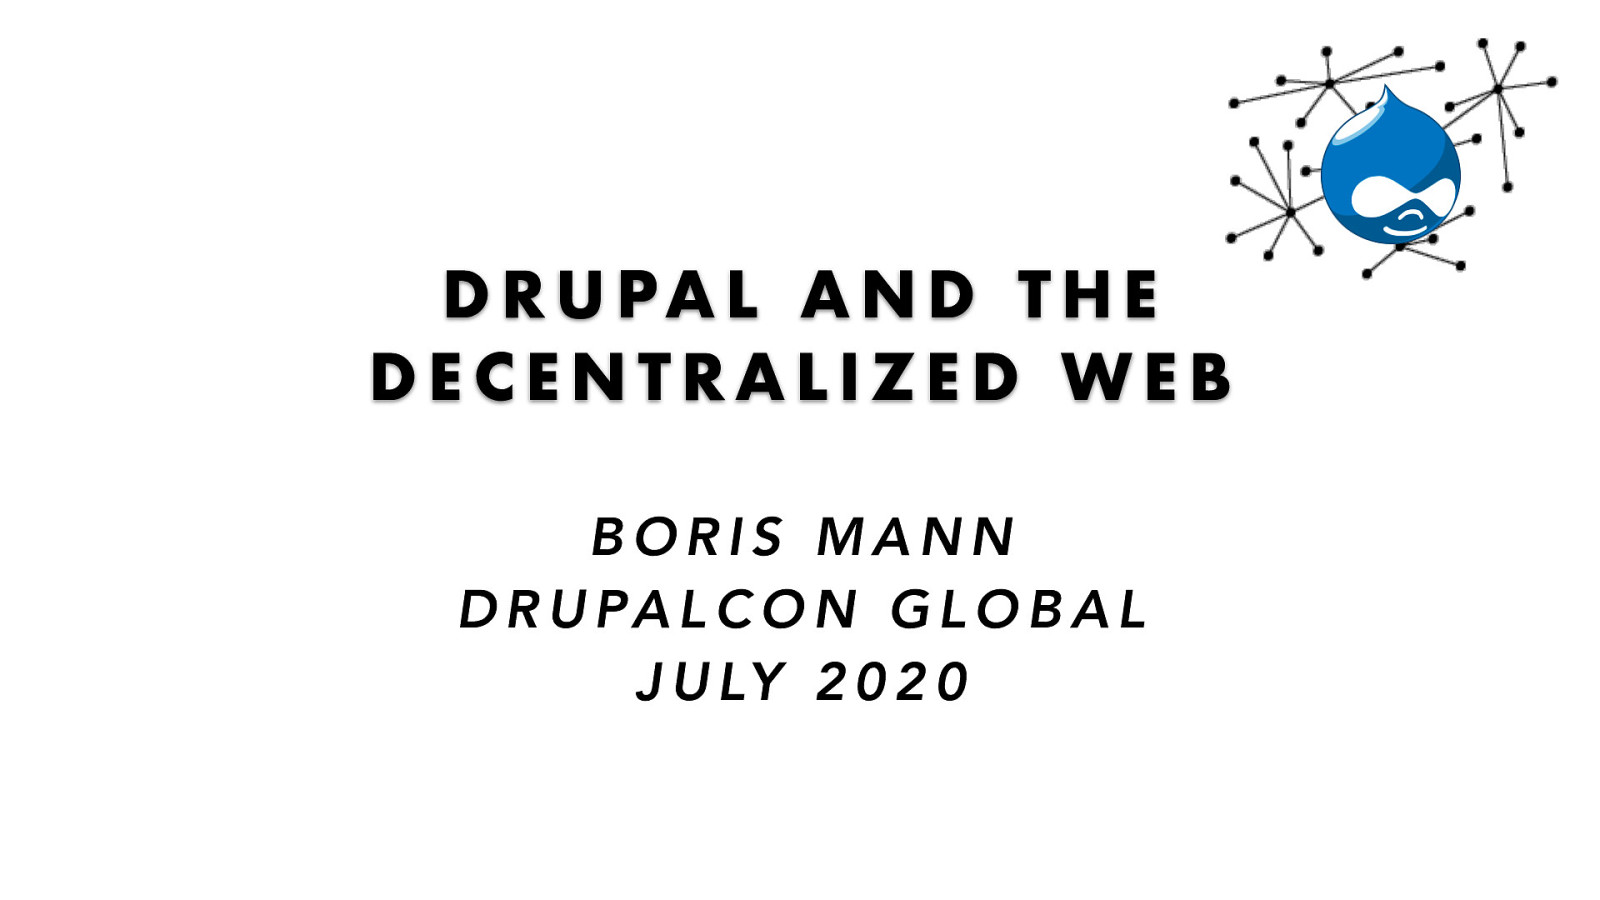 Drupal and the Decentralized Web